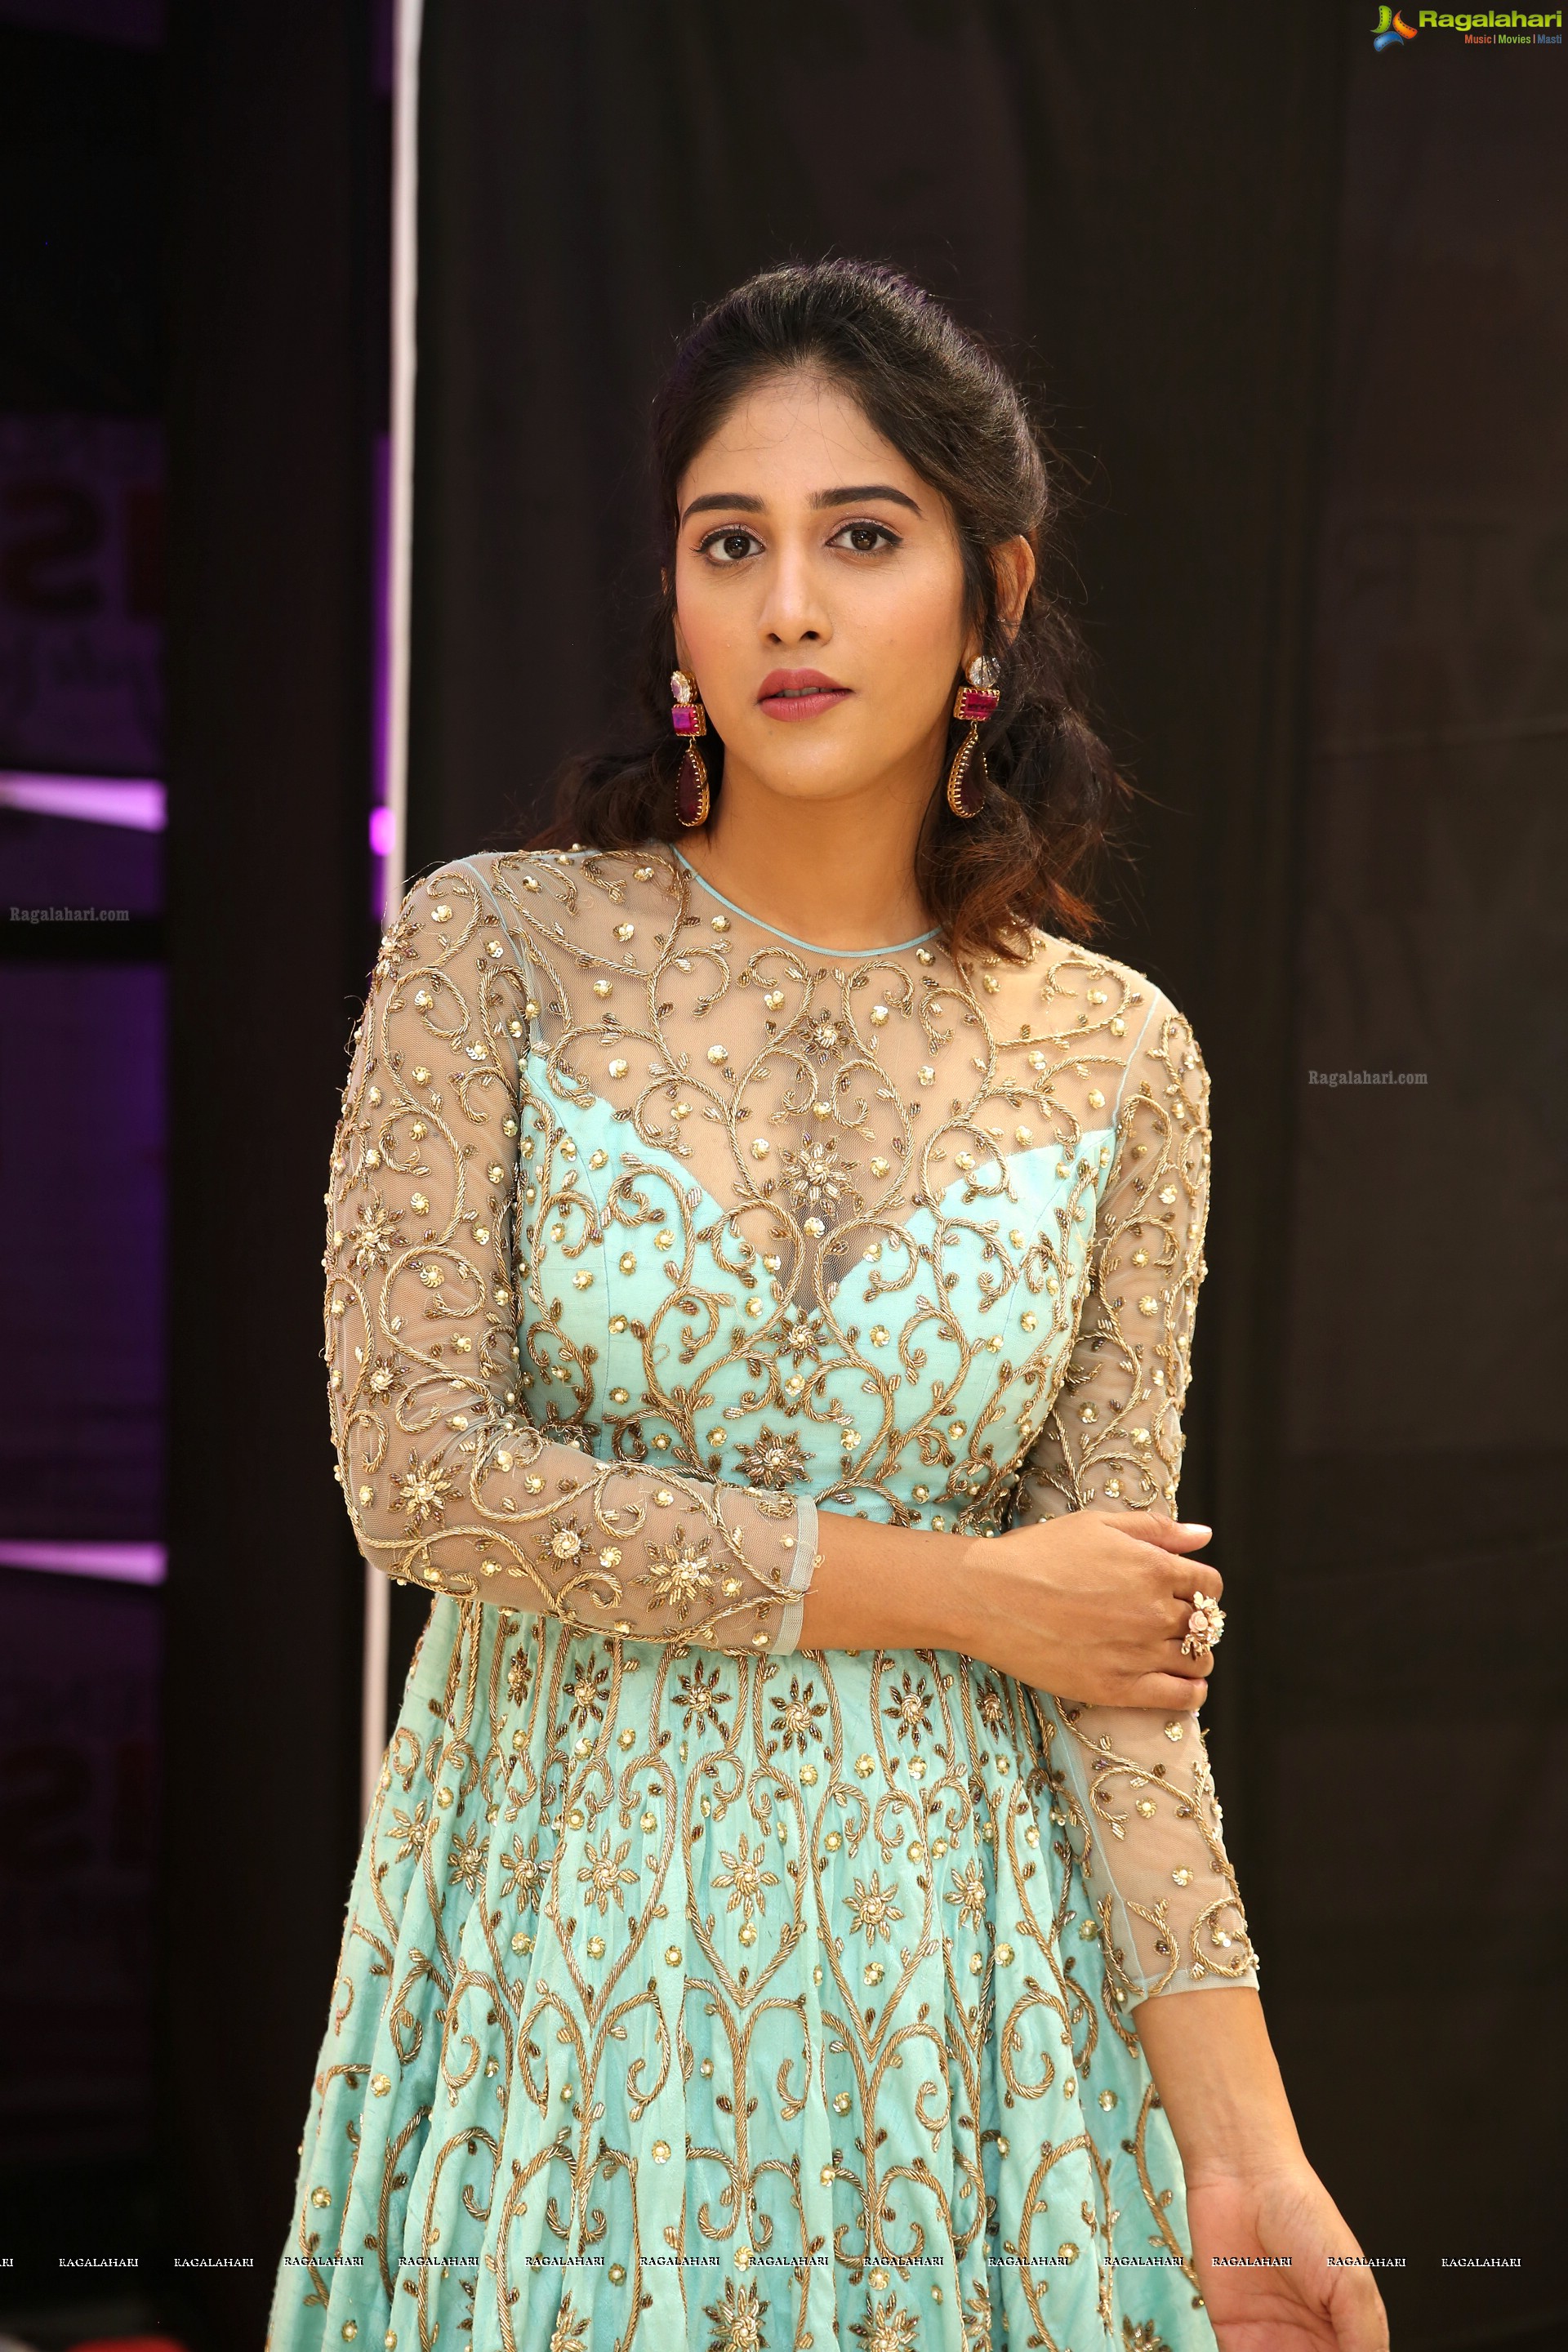 Chandini Chowdary at Reliance Trends Miss Hyderabad 2018 Announcement (High Definition Photos)